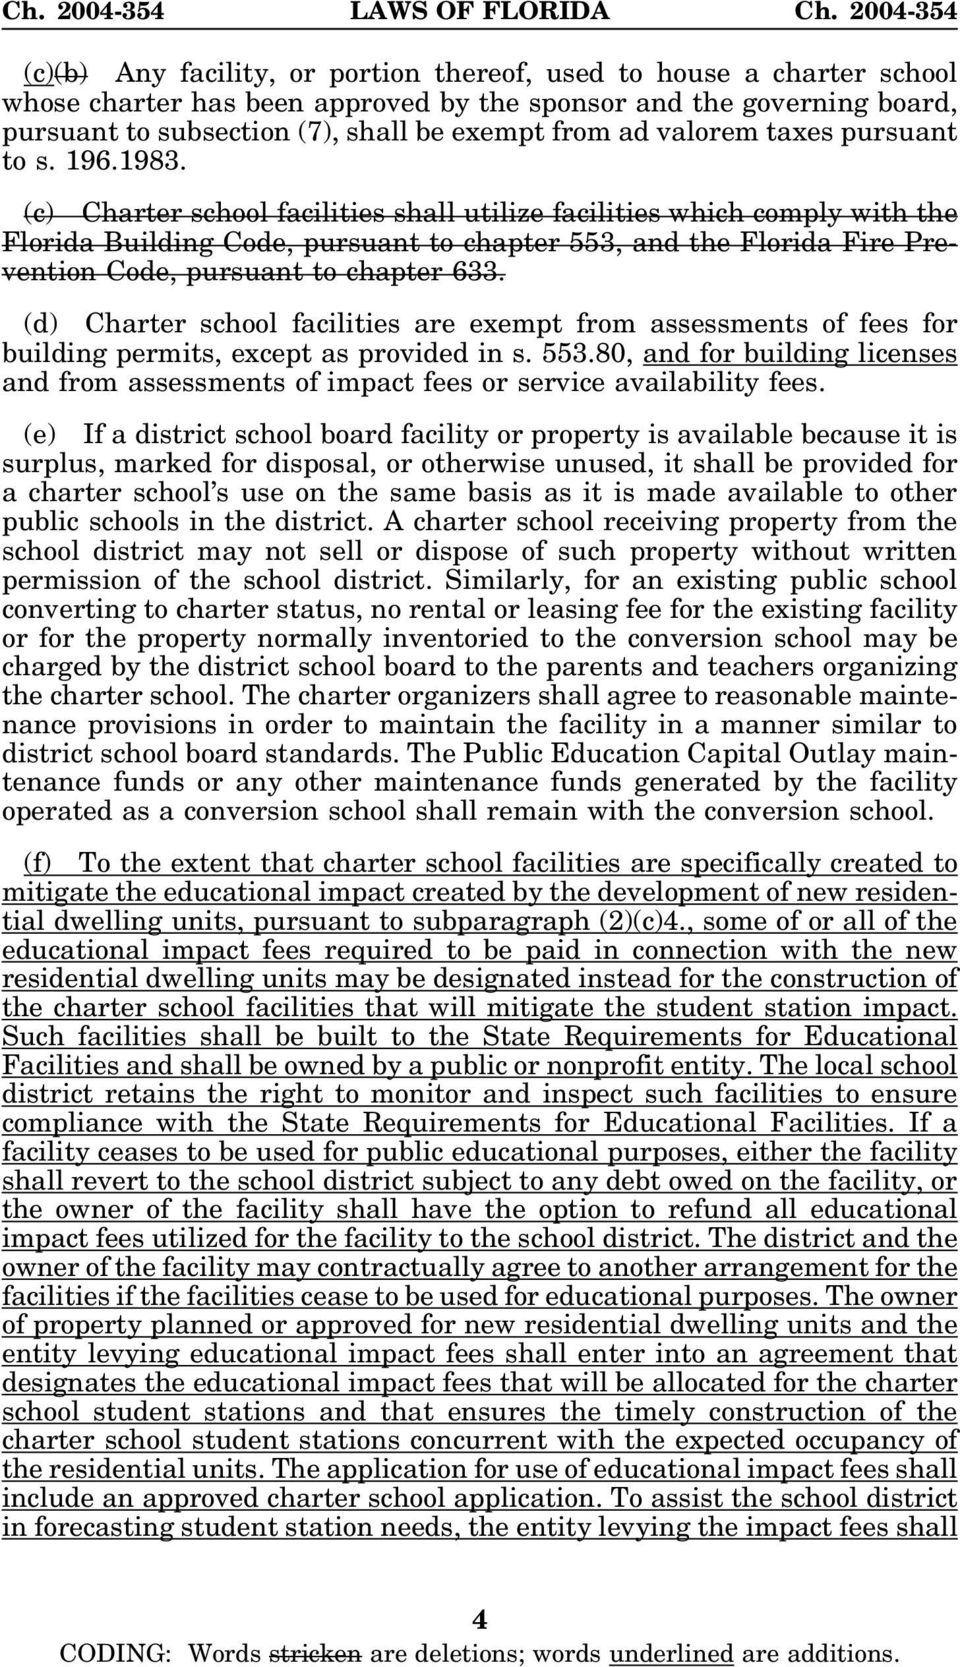 (c) Charter school facilities shall utilize facilities which comply with the Florida Building Code, pursuant to chapter 553, and the Florida Fire Prevention Code, pursuant to chapter 633.